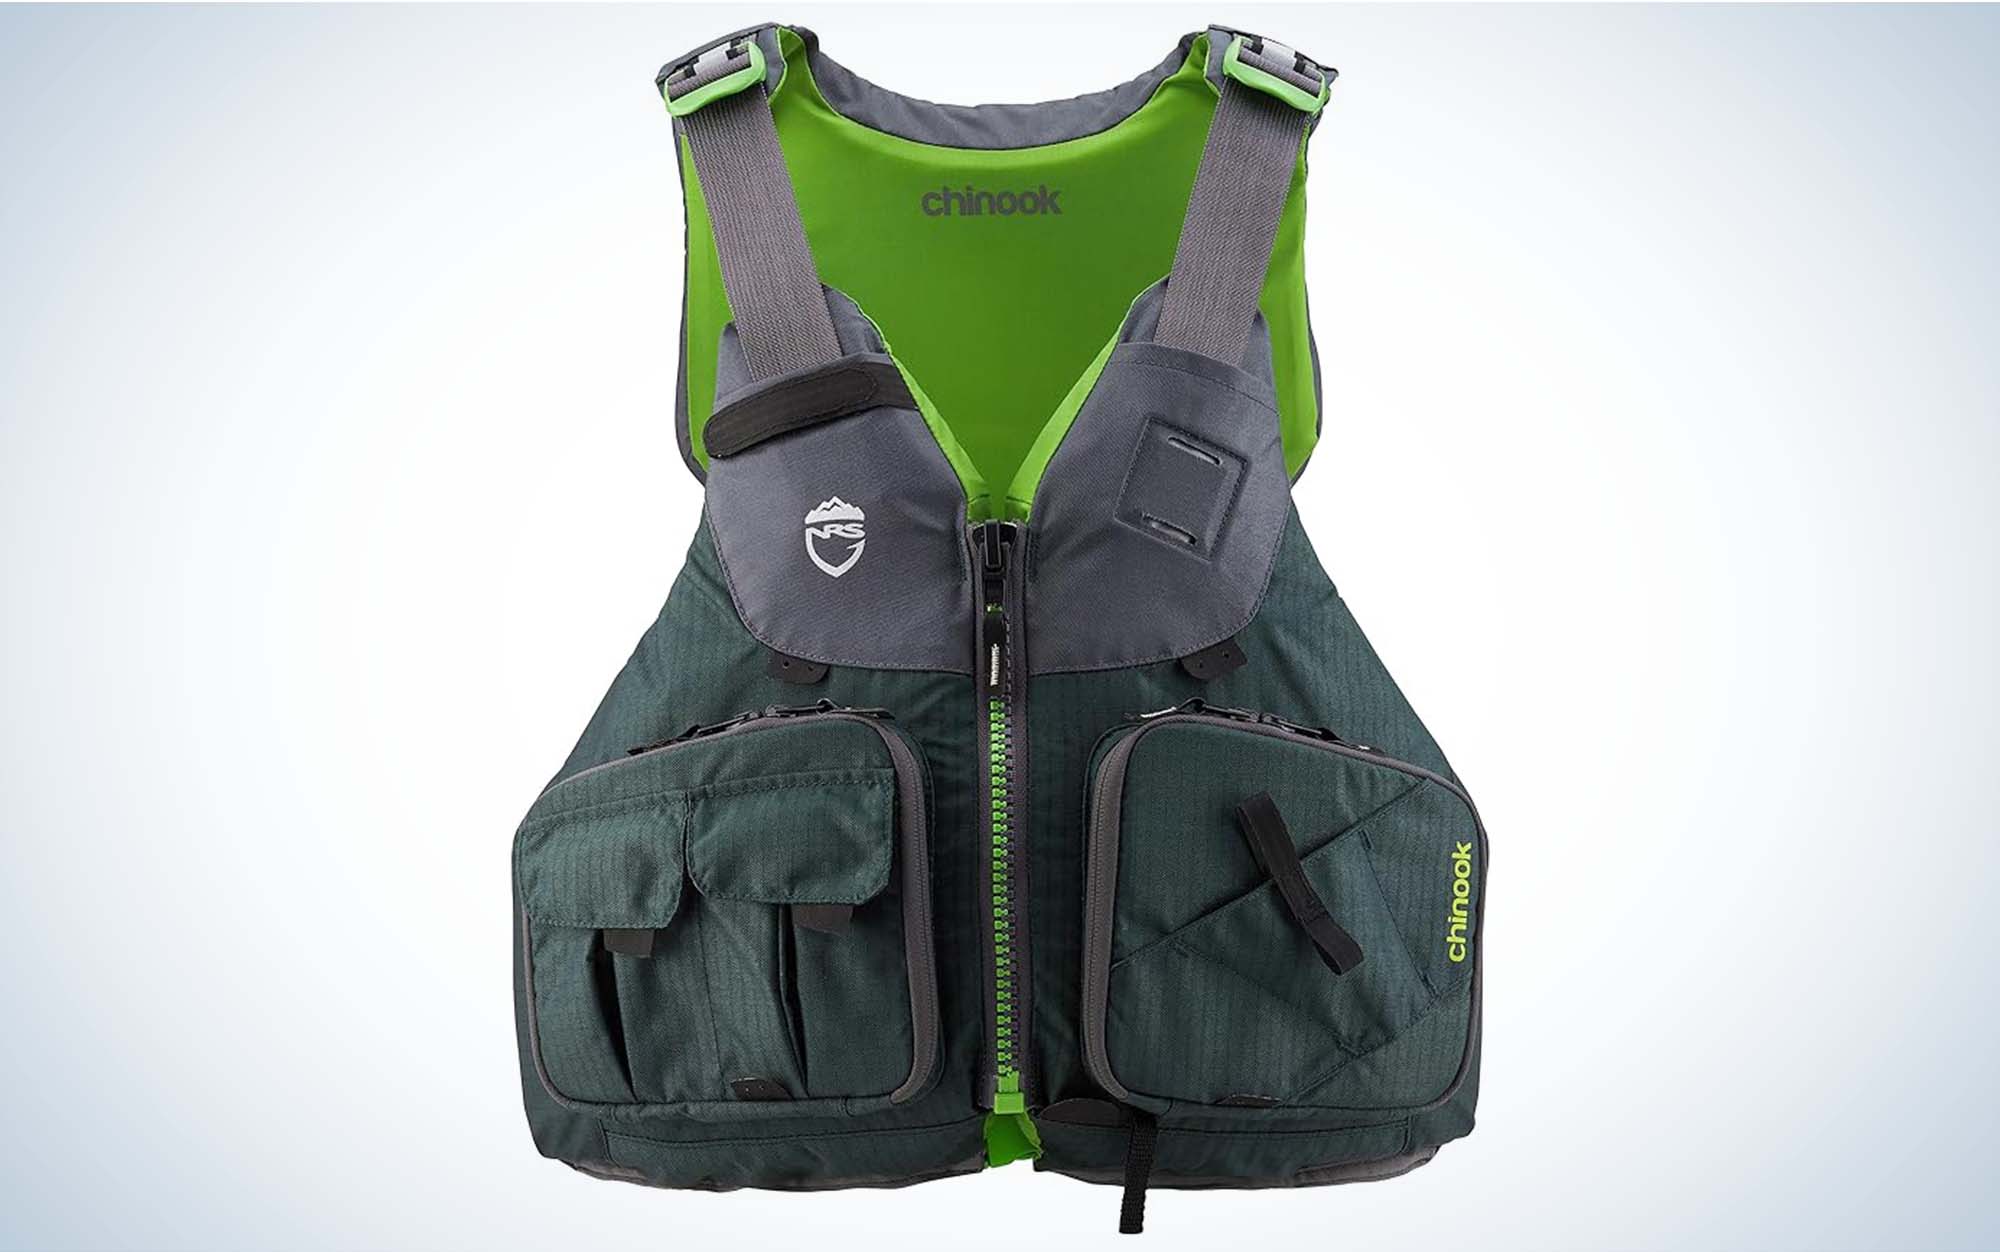 Utra Inflatable Fisher PFD vest has a front-opening zip